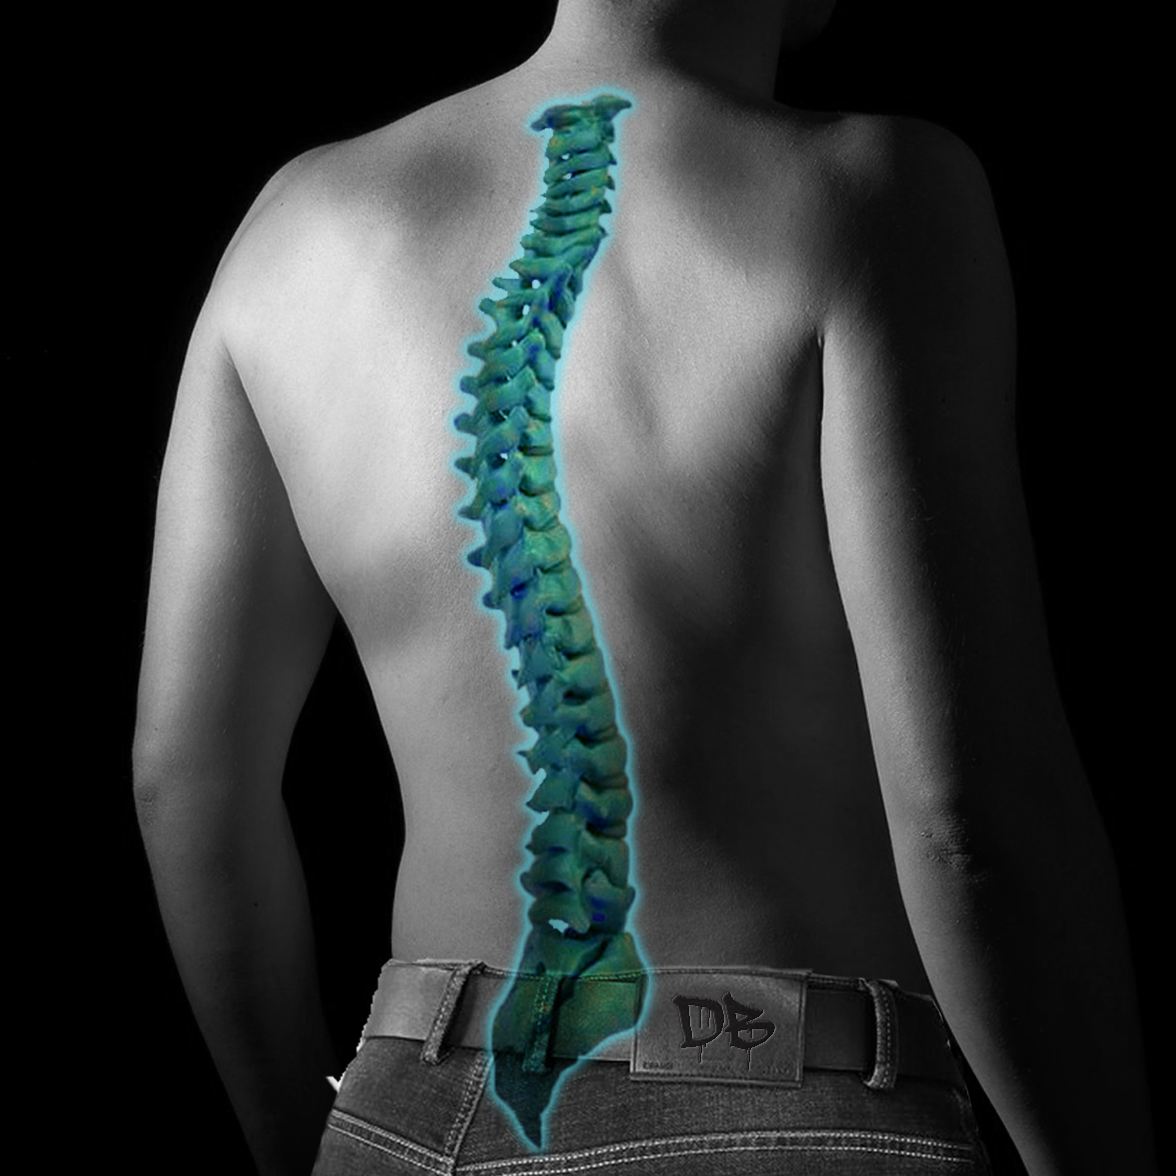 Dean Burnetti Law represents victims of spinal cord injuries